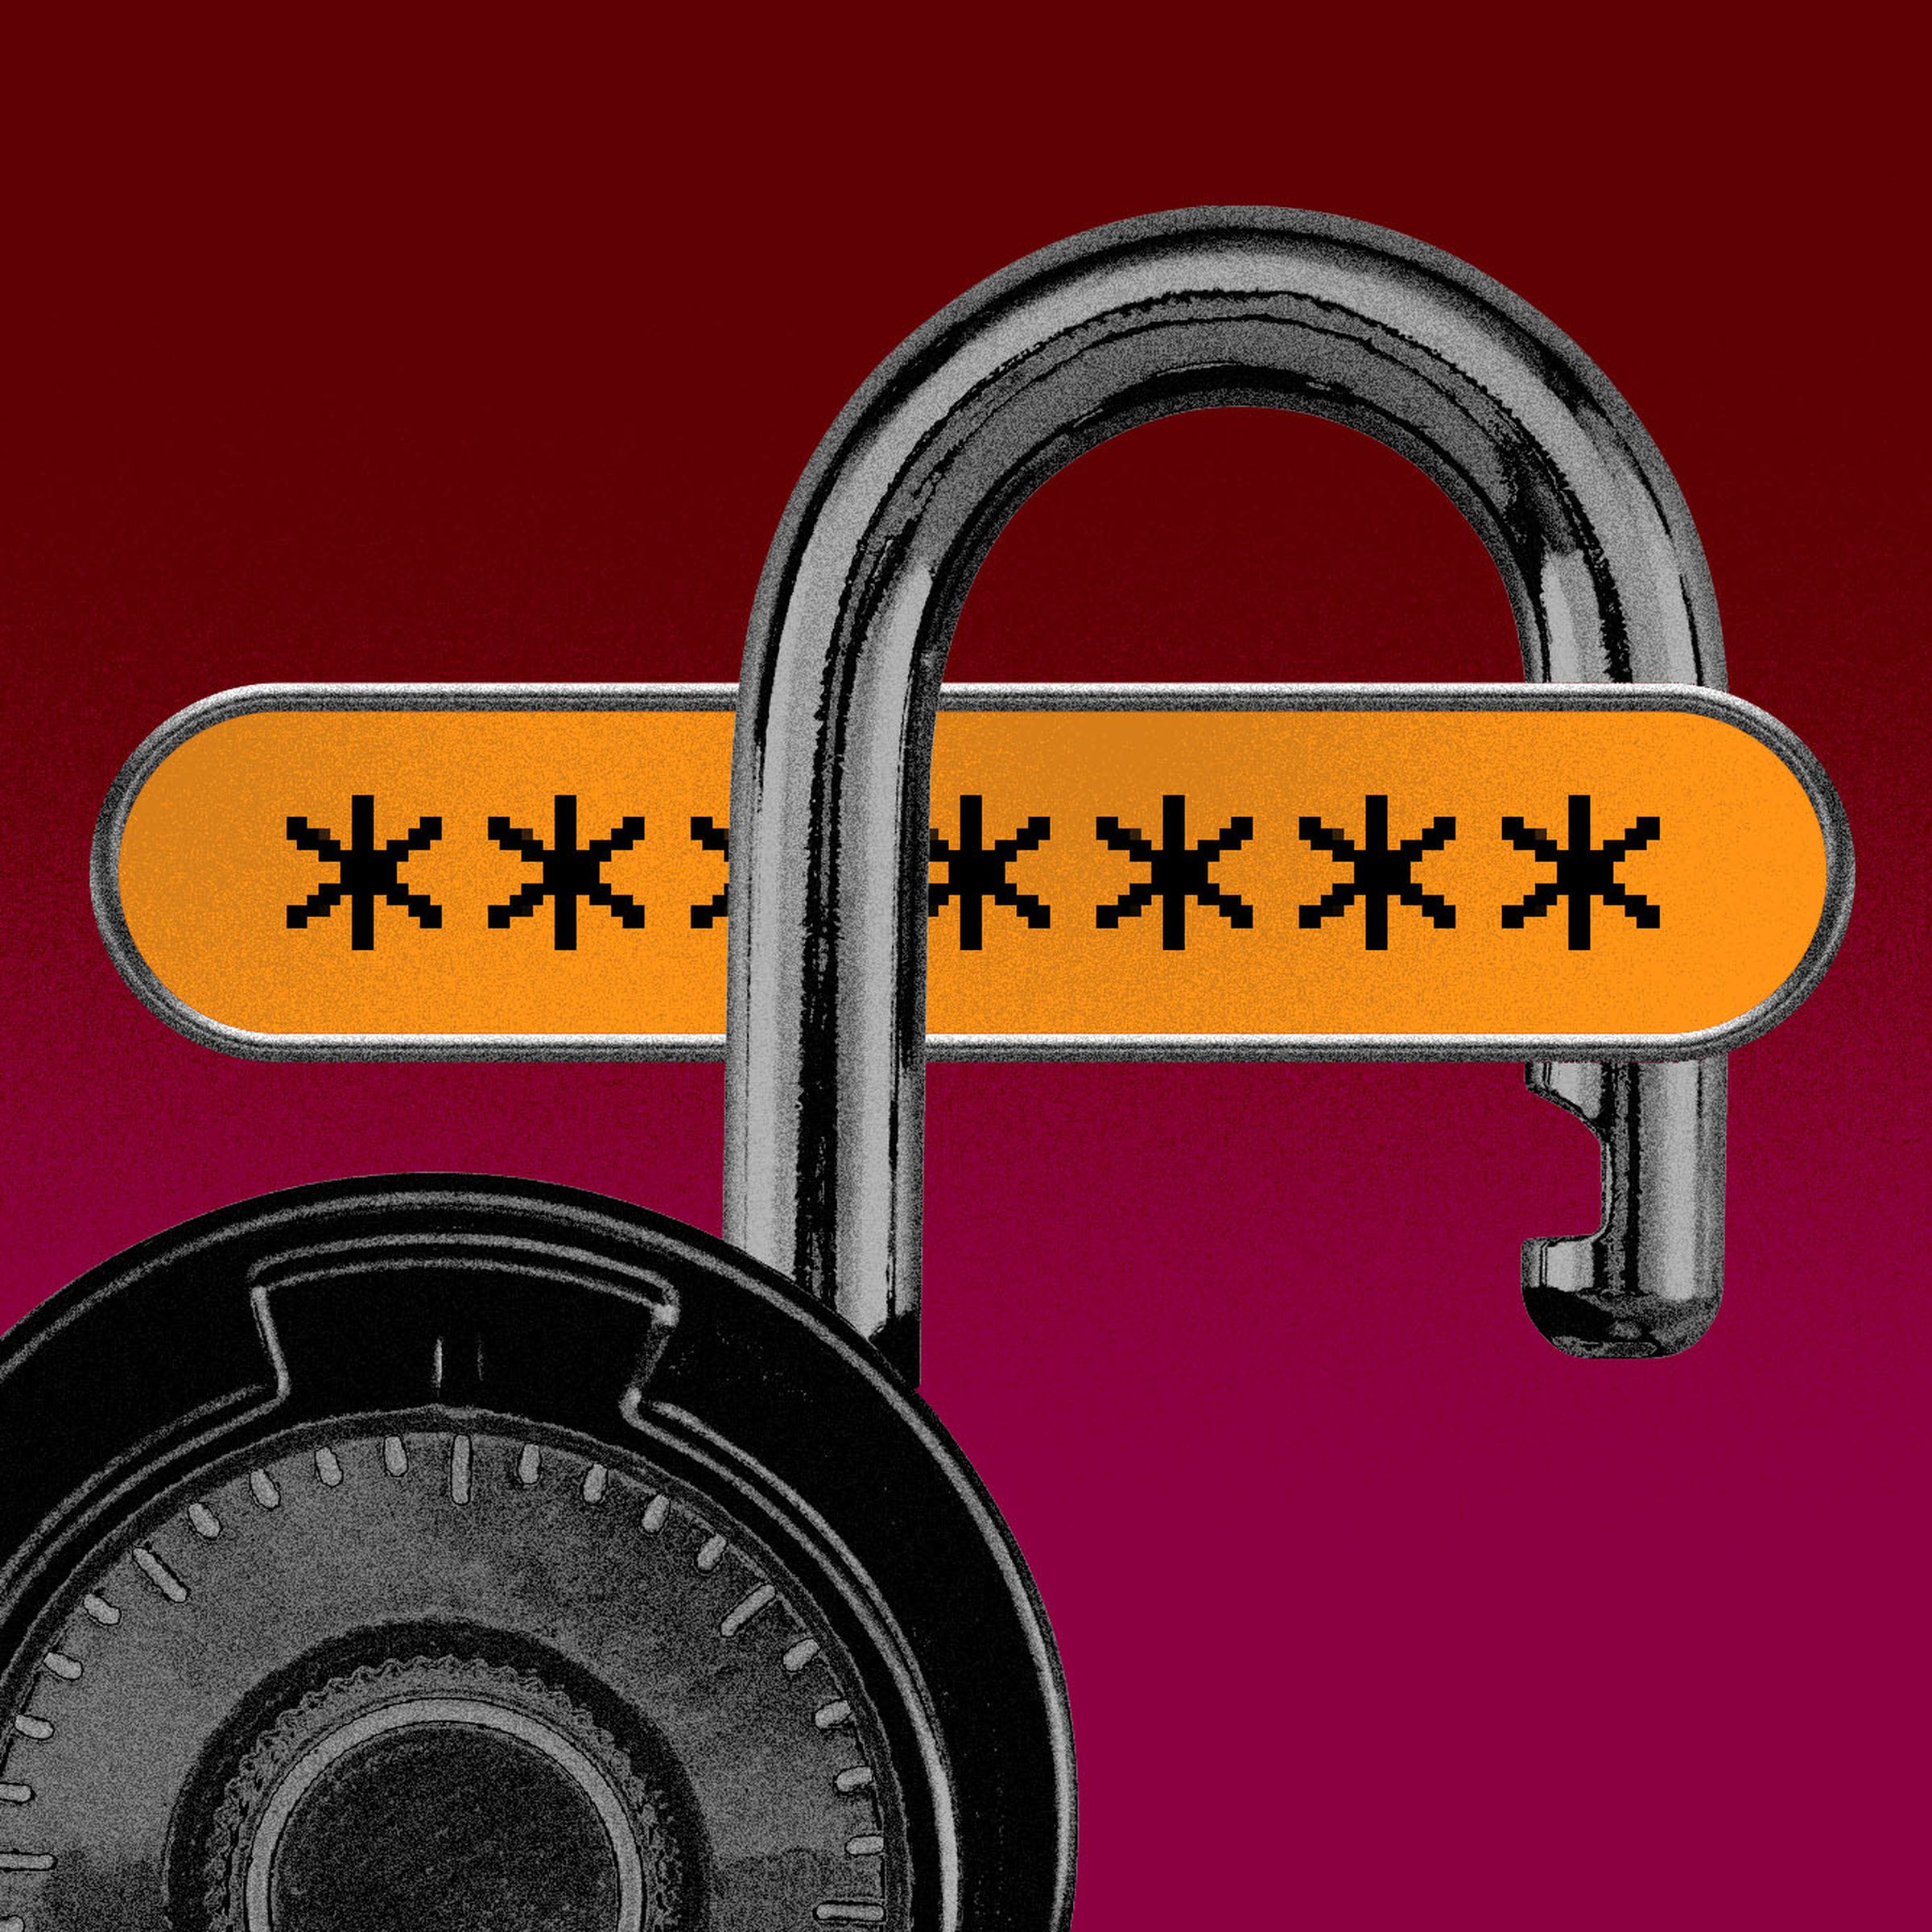 Illustration of a password above an open combination lock, implying a data breach.